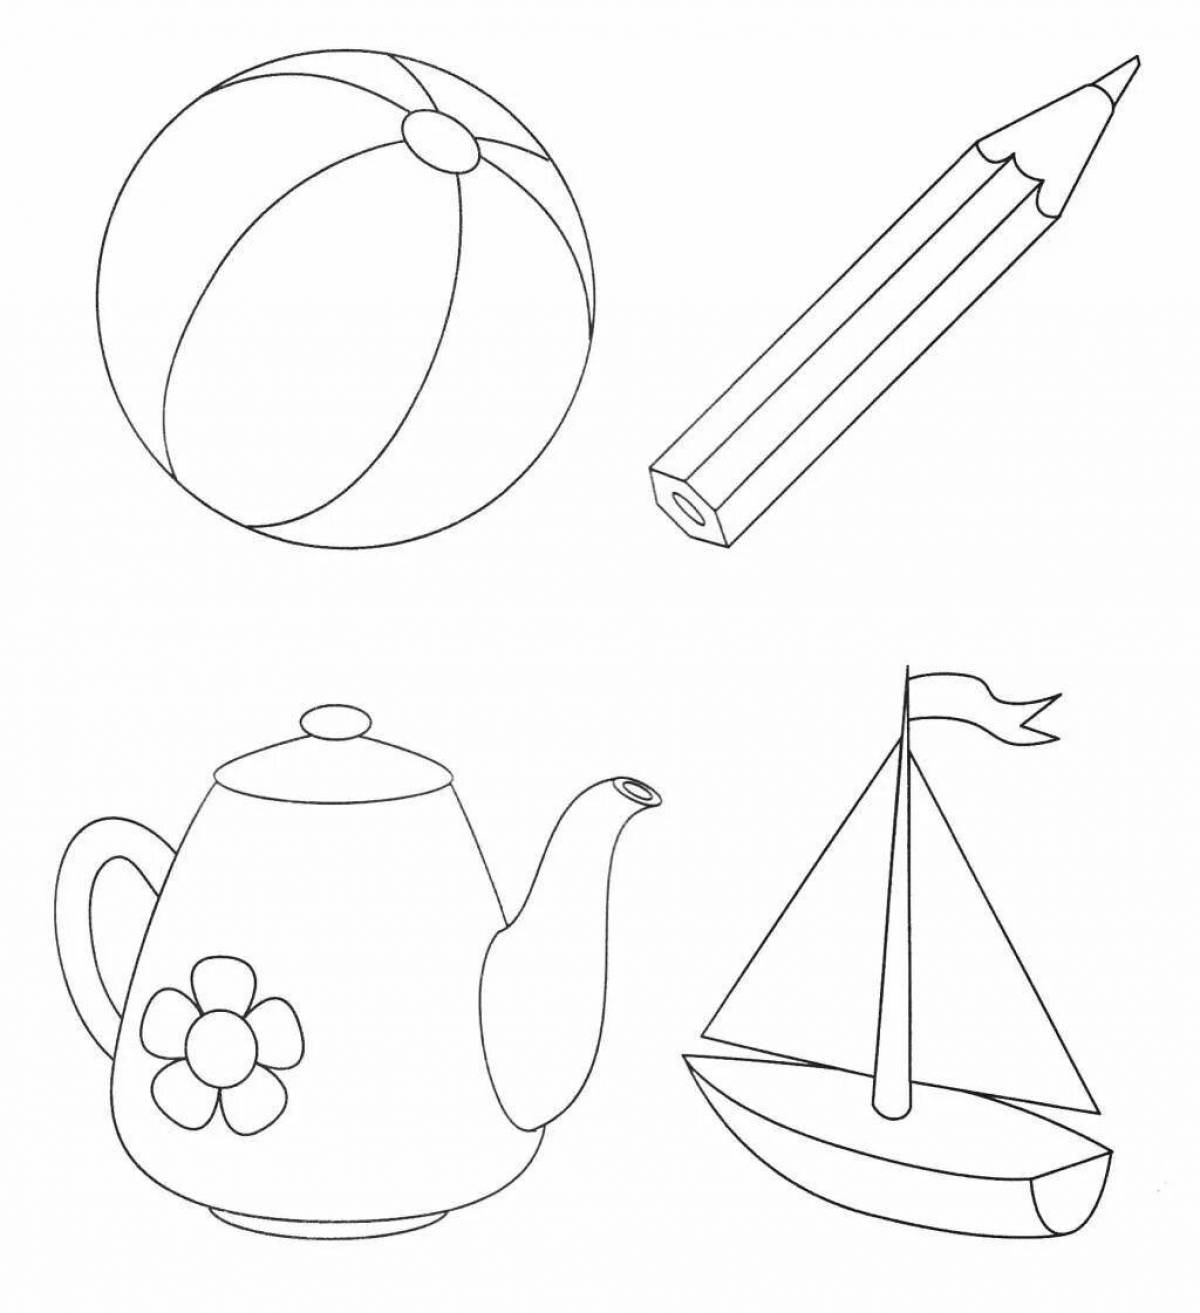 Colorful coloring pages for little mathematicians